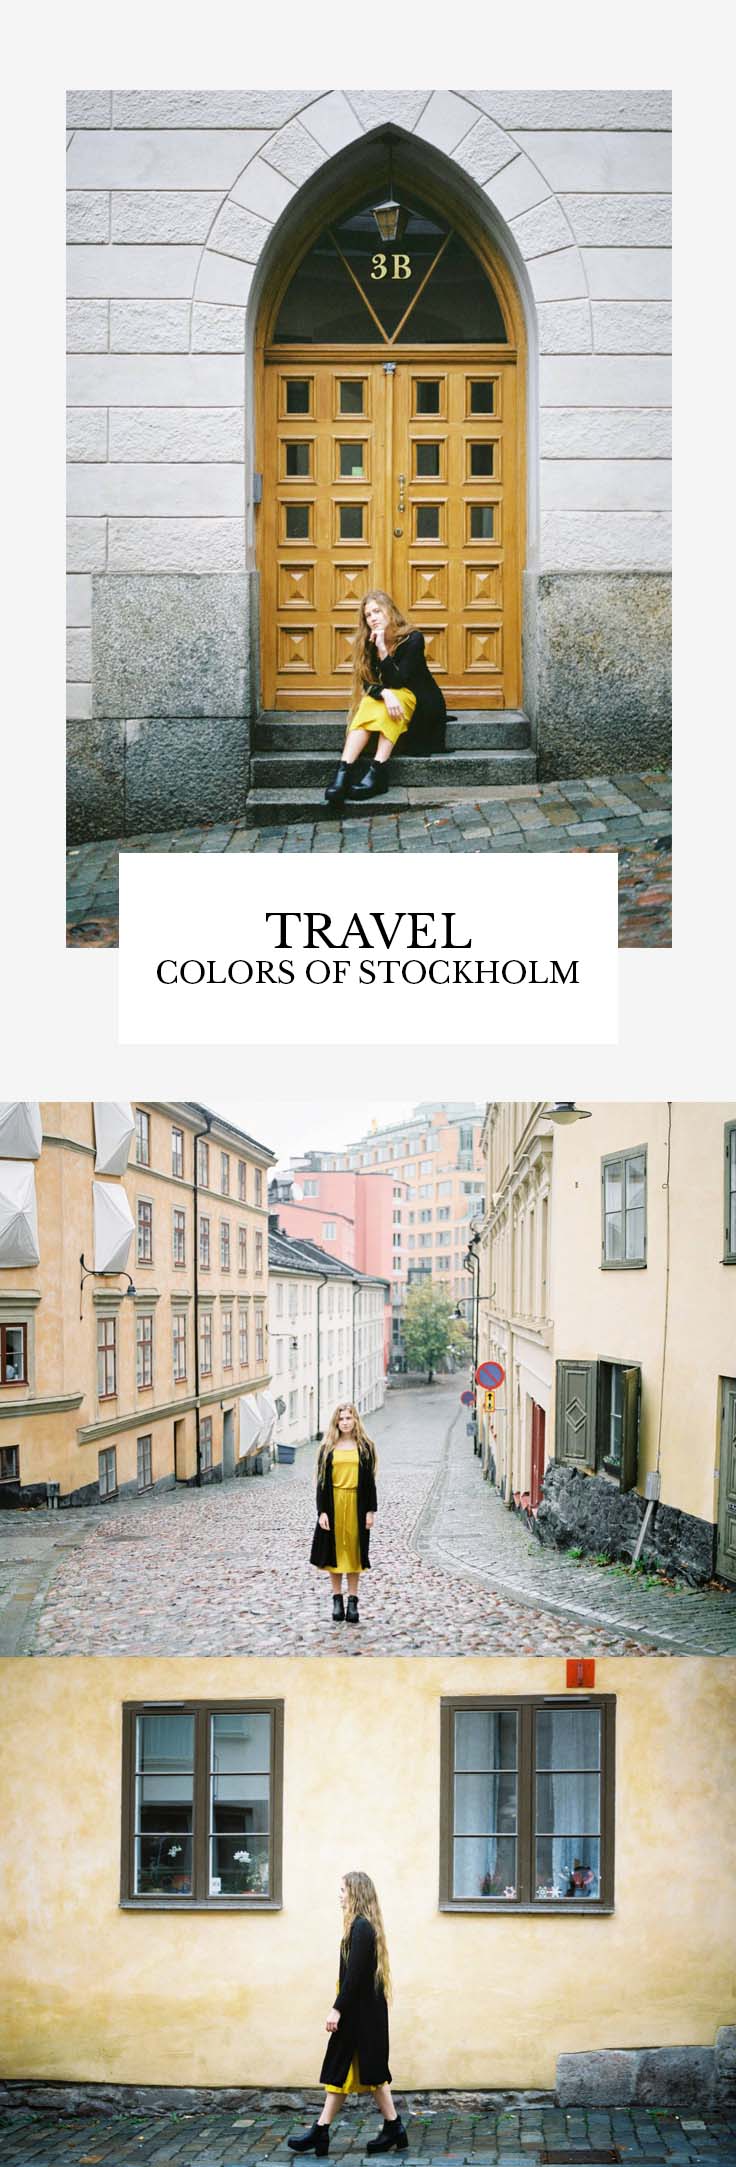 Travel - Colors of Stockholm